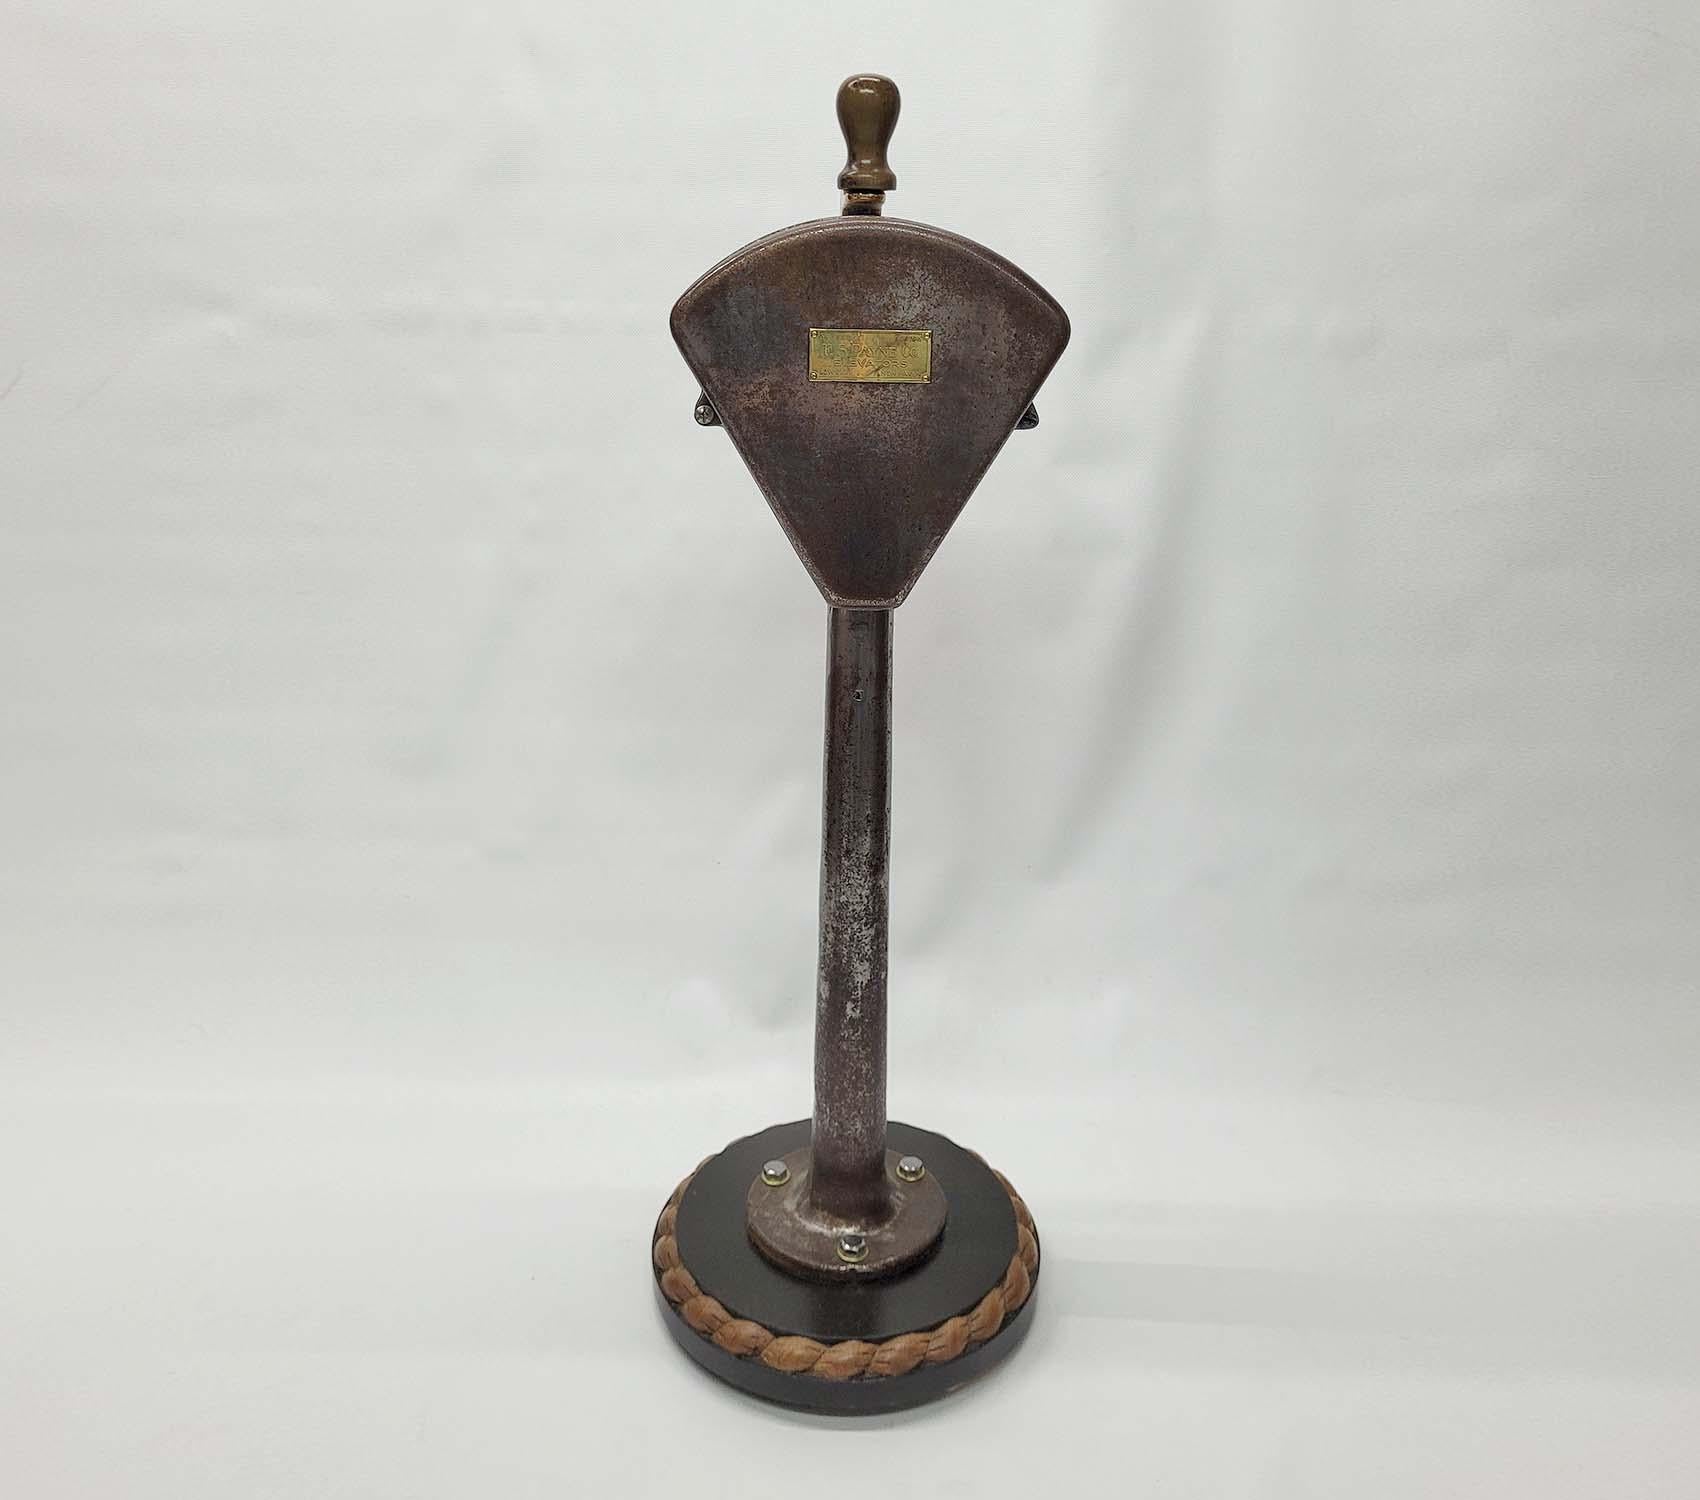 Early 20th Century F. S. Payne Elevator Car Control Pedestal For Sale